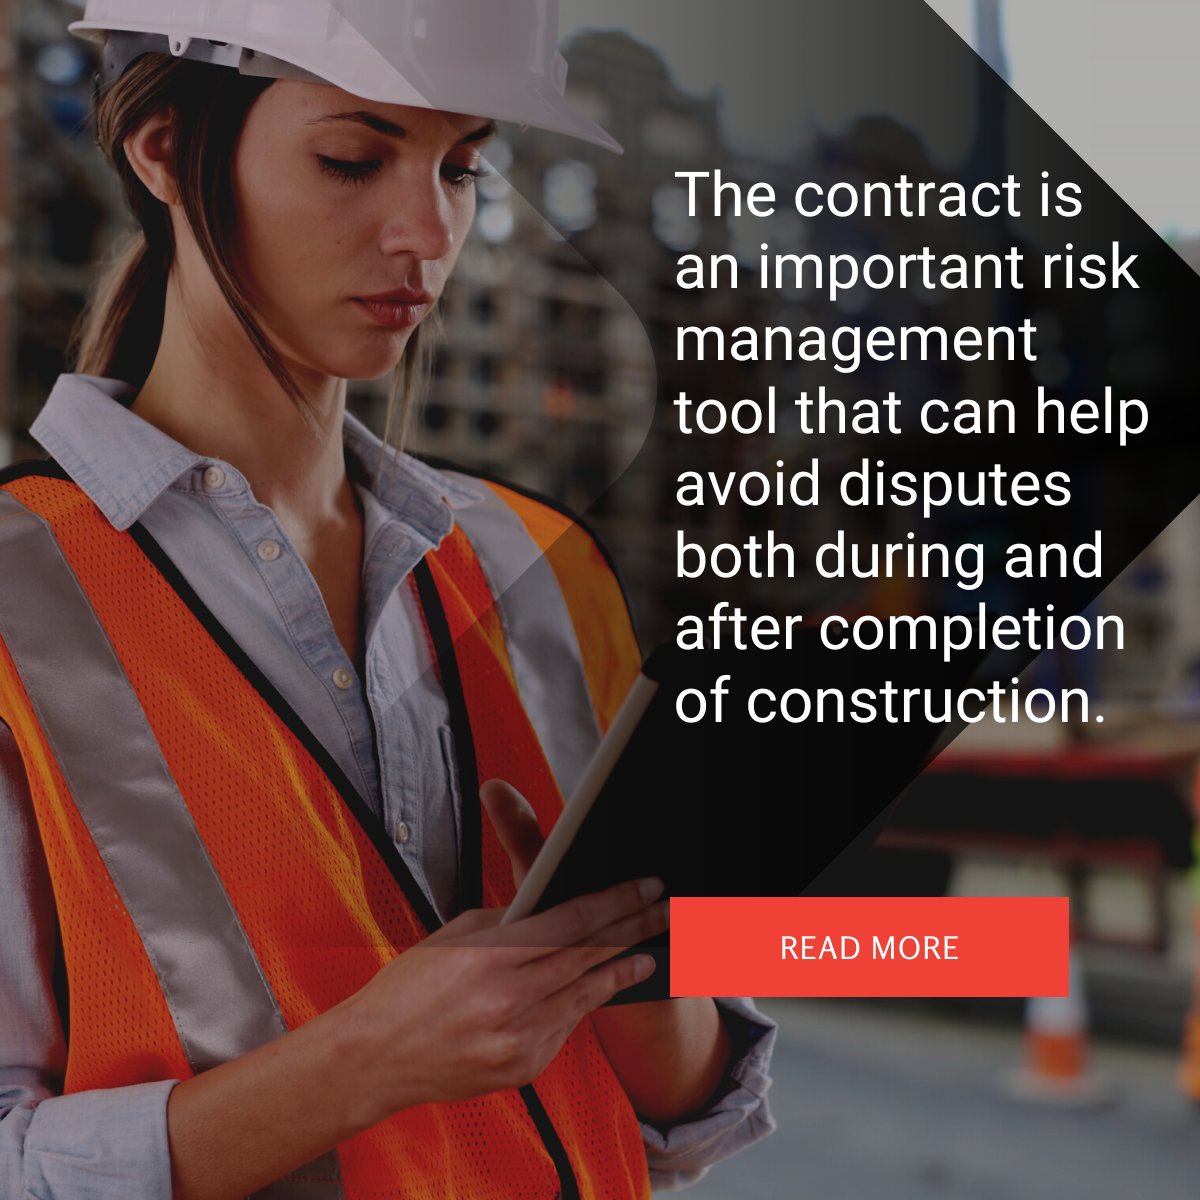 The importance of a well-drafted contract cannot be overstated in the construction industry. It is your key to avoiding disputes and ensuring your project runs smoothly. Read more about it: bit.ly/3T8h8o1 #AIAcontracts #riskmanagement